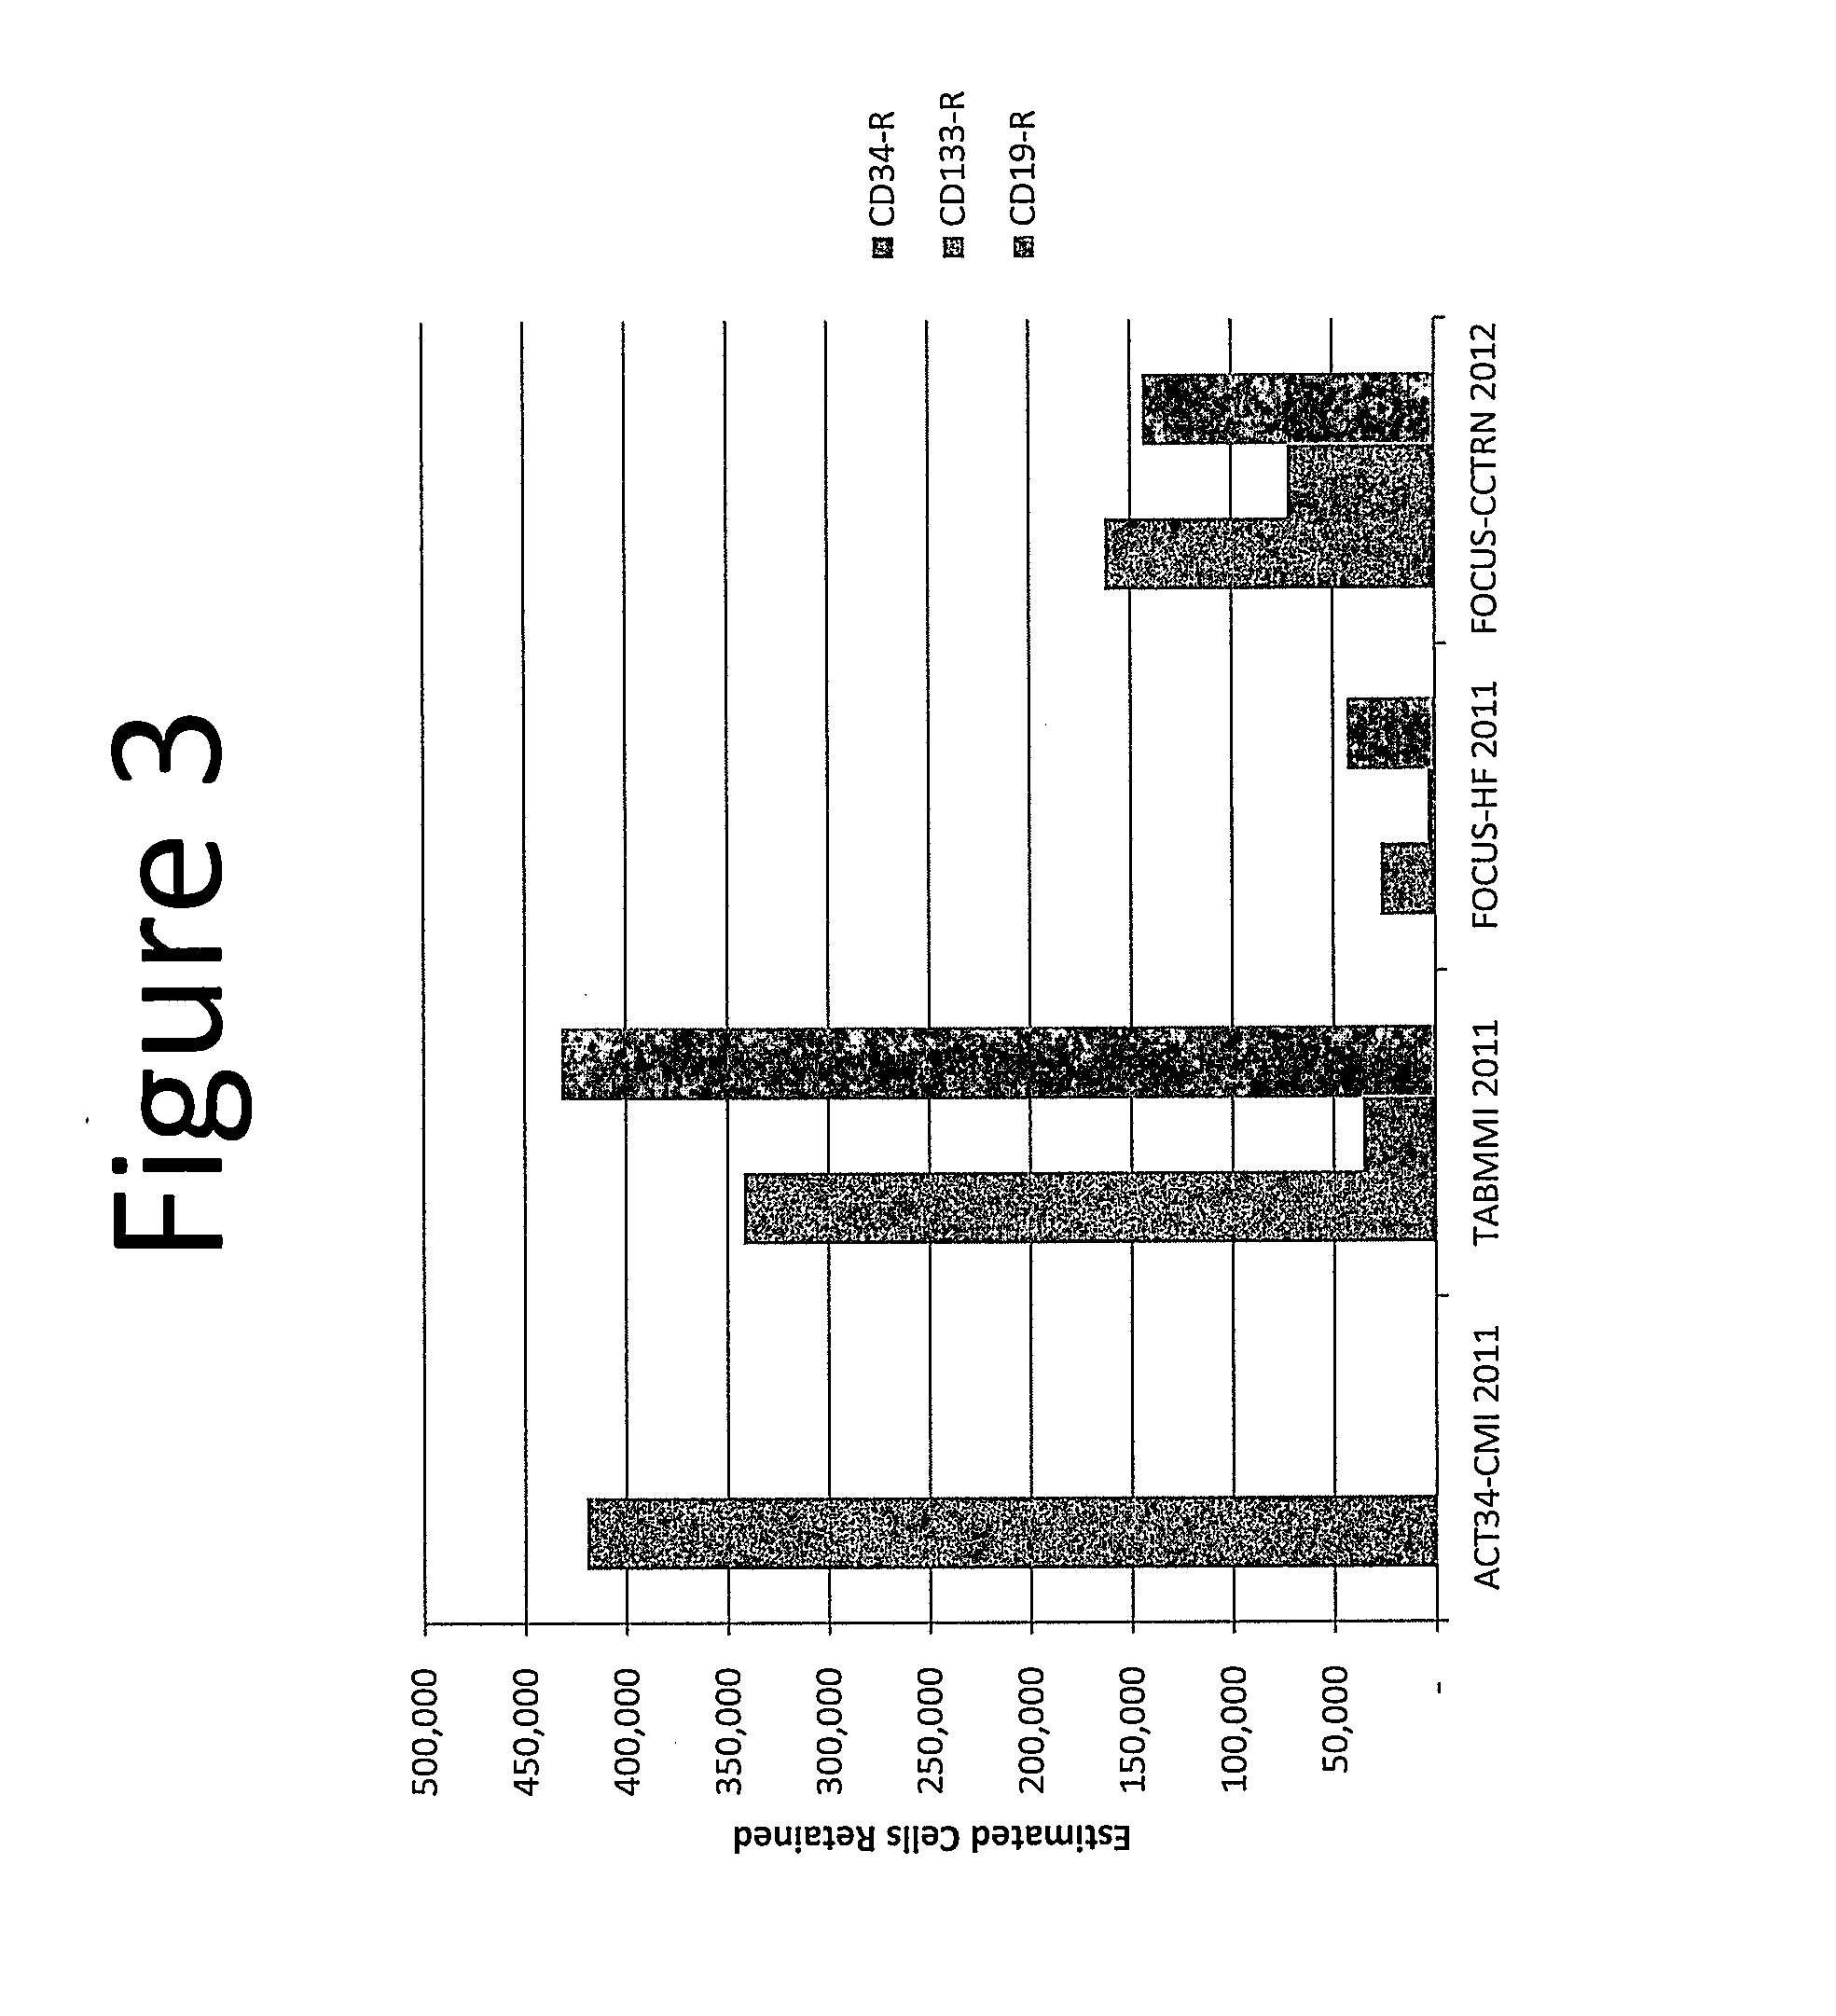 Methods of measuring potential for therapeutic potency and defining dosages for autologous cell therapies